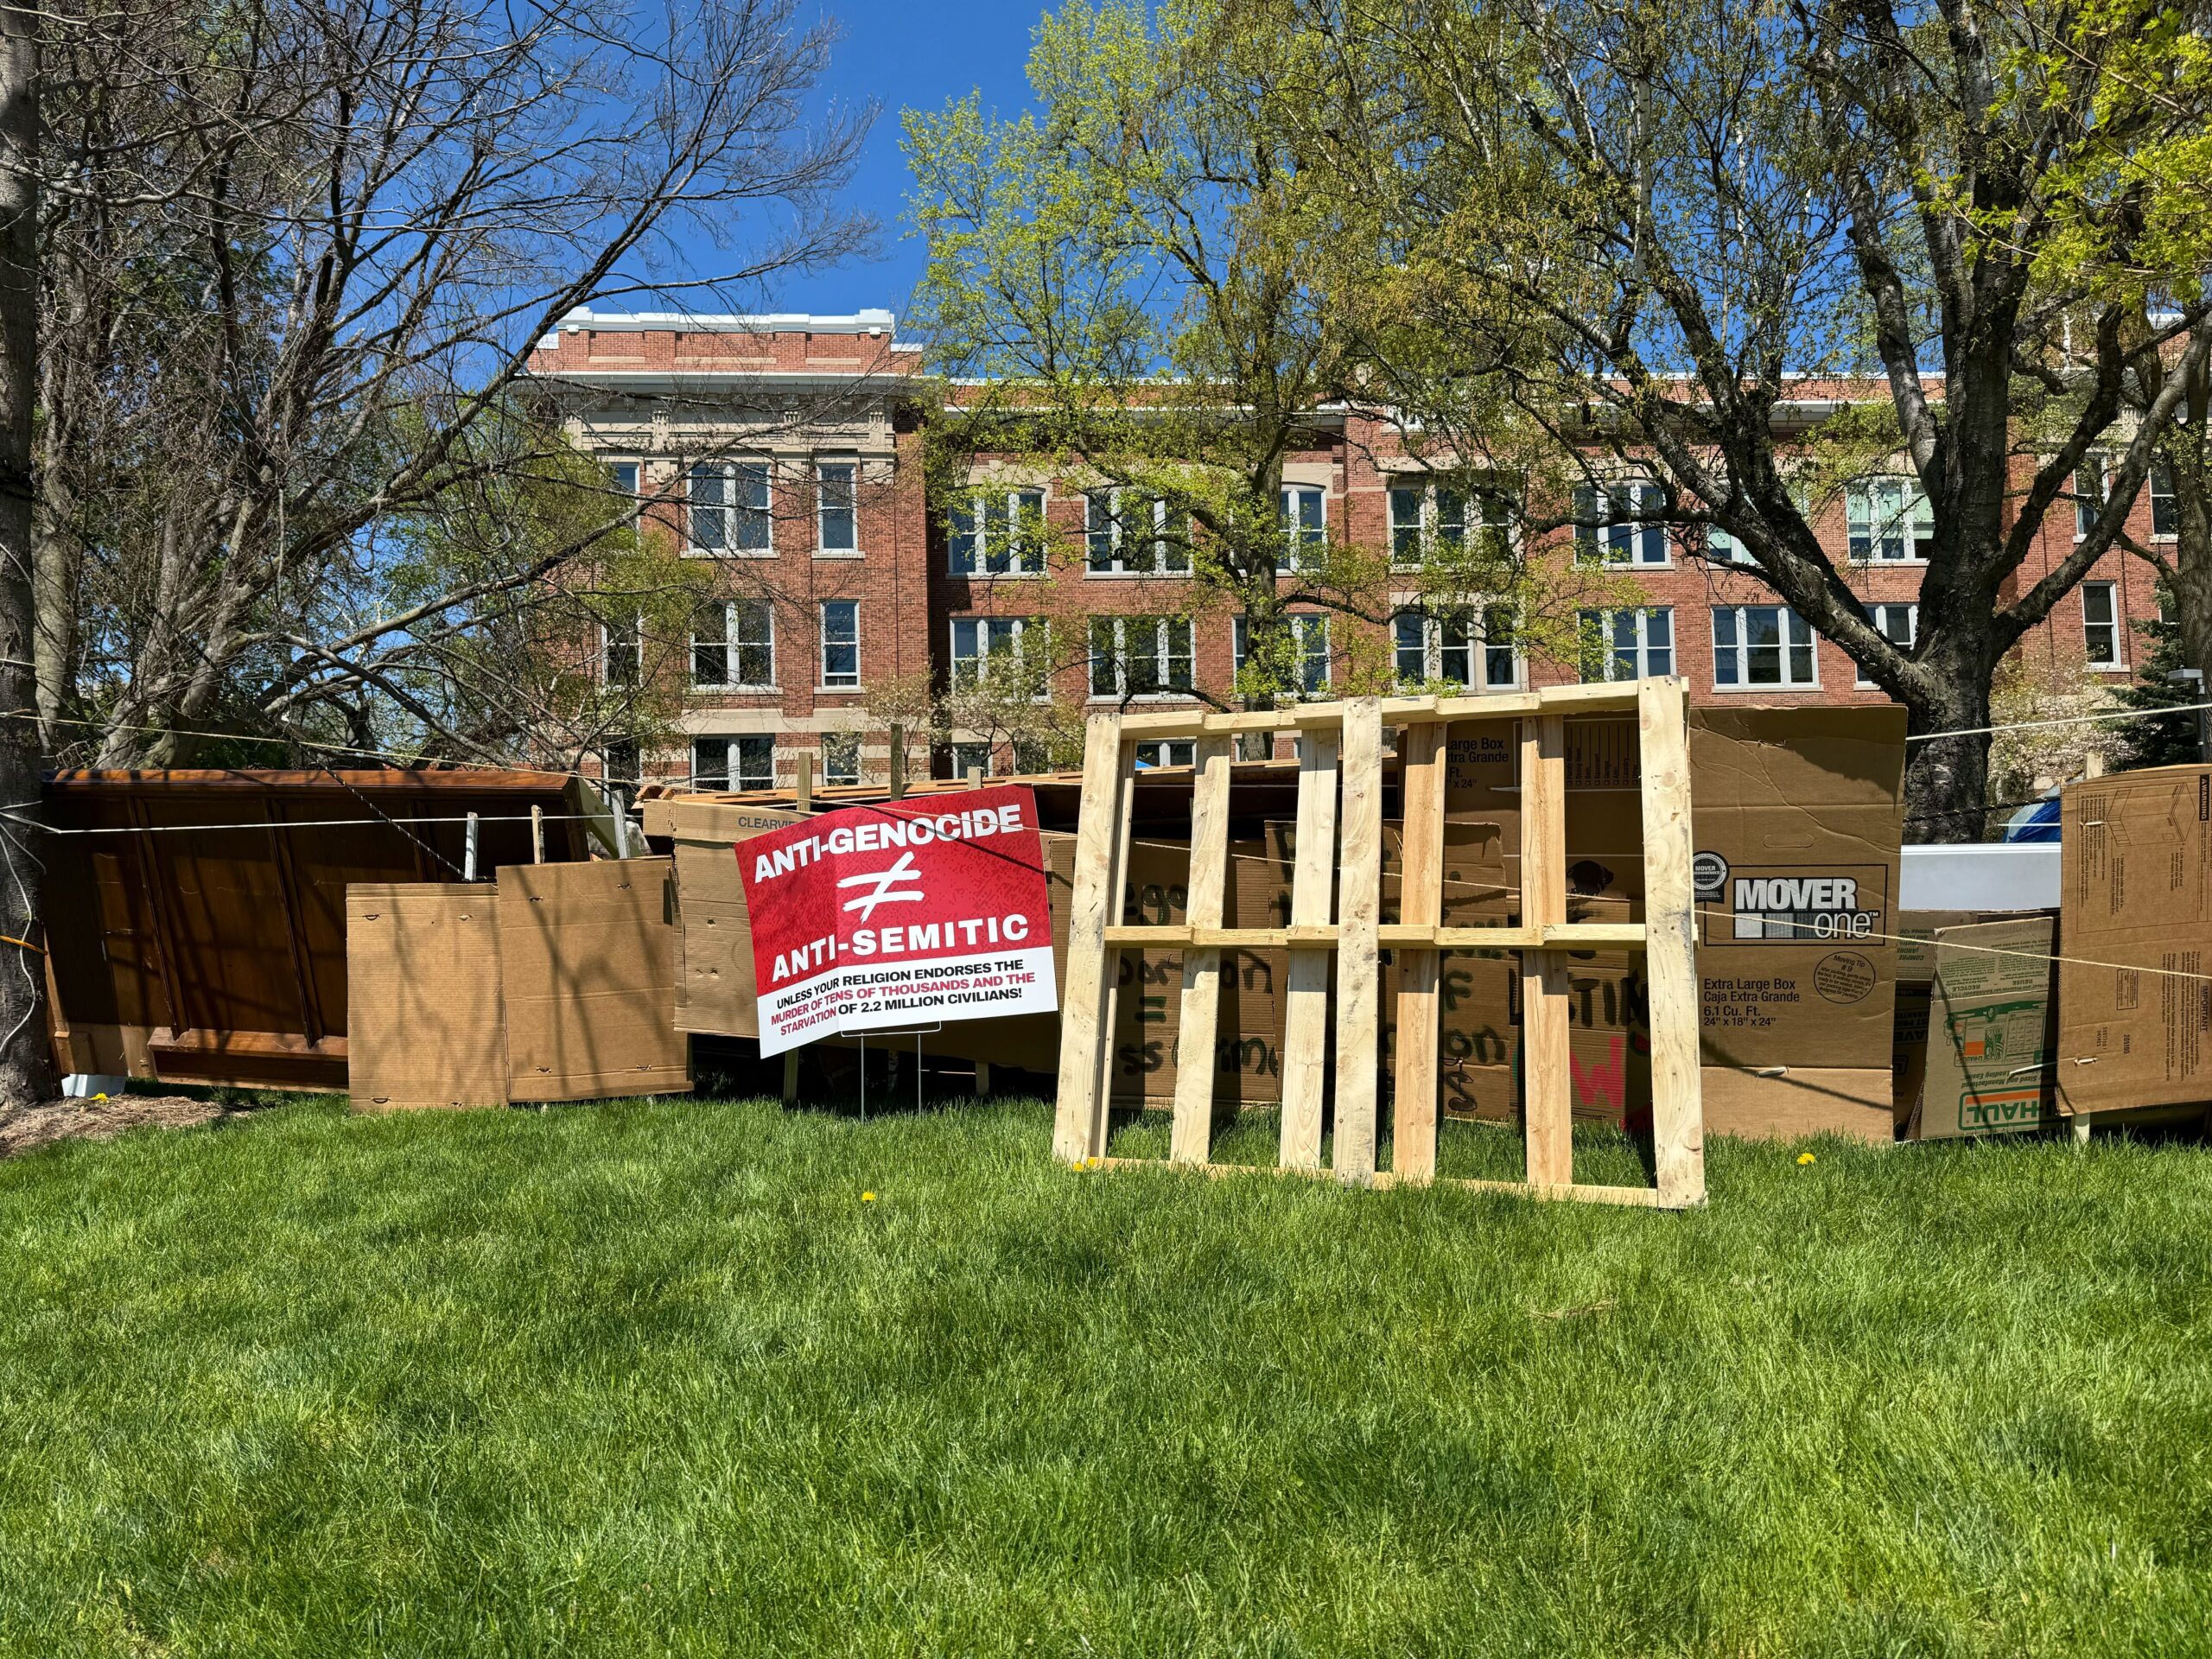 Plywood, folding tables and cardboard create a barrier in the grass on UW-Milwaukee's campus. A brick campus building is in the background with a blue sky.